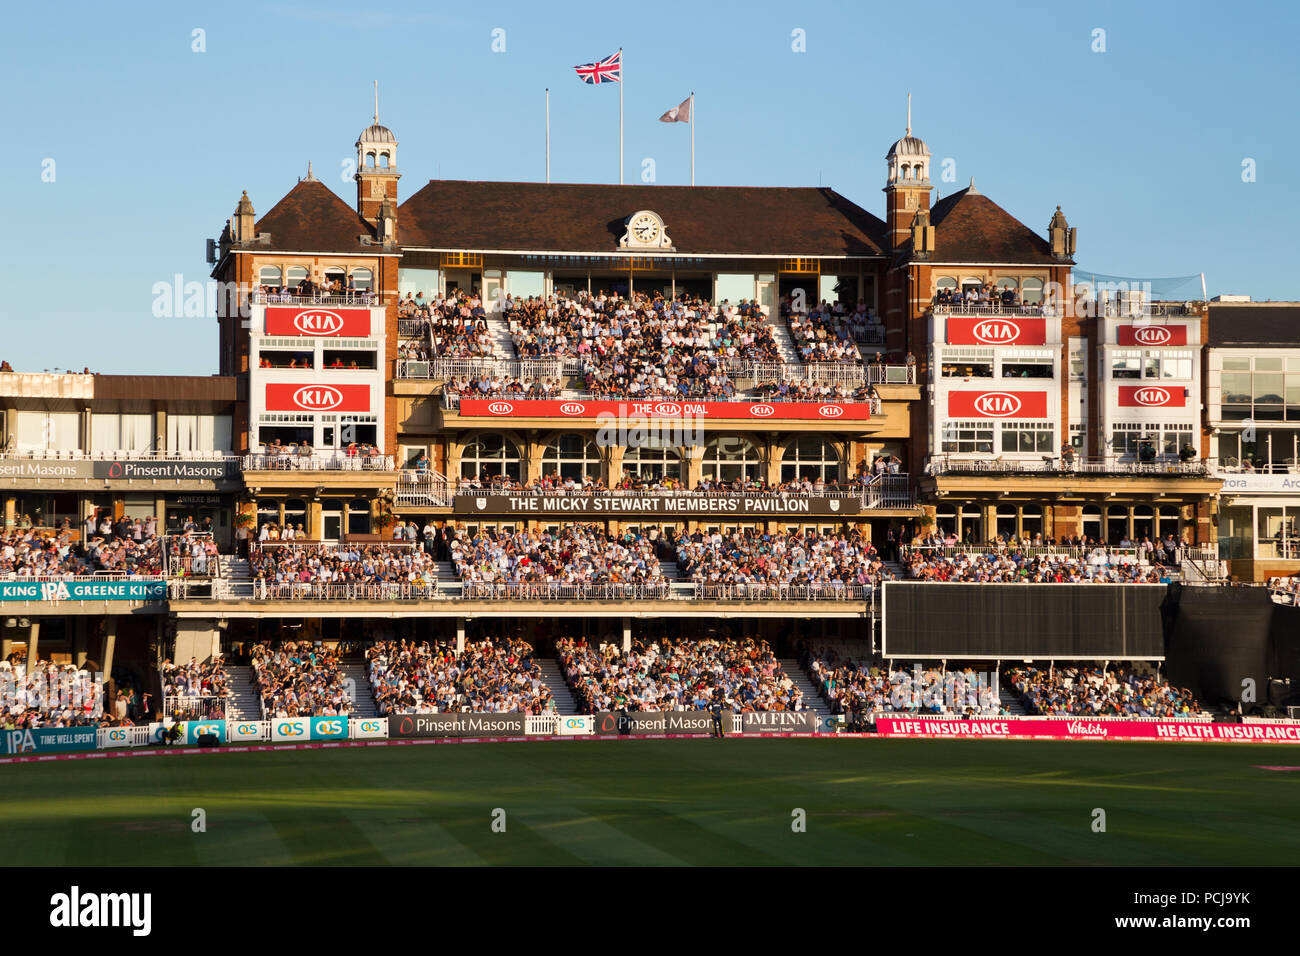 The Micky Stewart Members' Pavilion overlooking 20 20 day night match and the cricket pitch / wicket of The Oval cricket ground (The Kia Oval) Vauxhall, London. UK. (100) Stock Photo